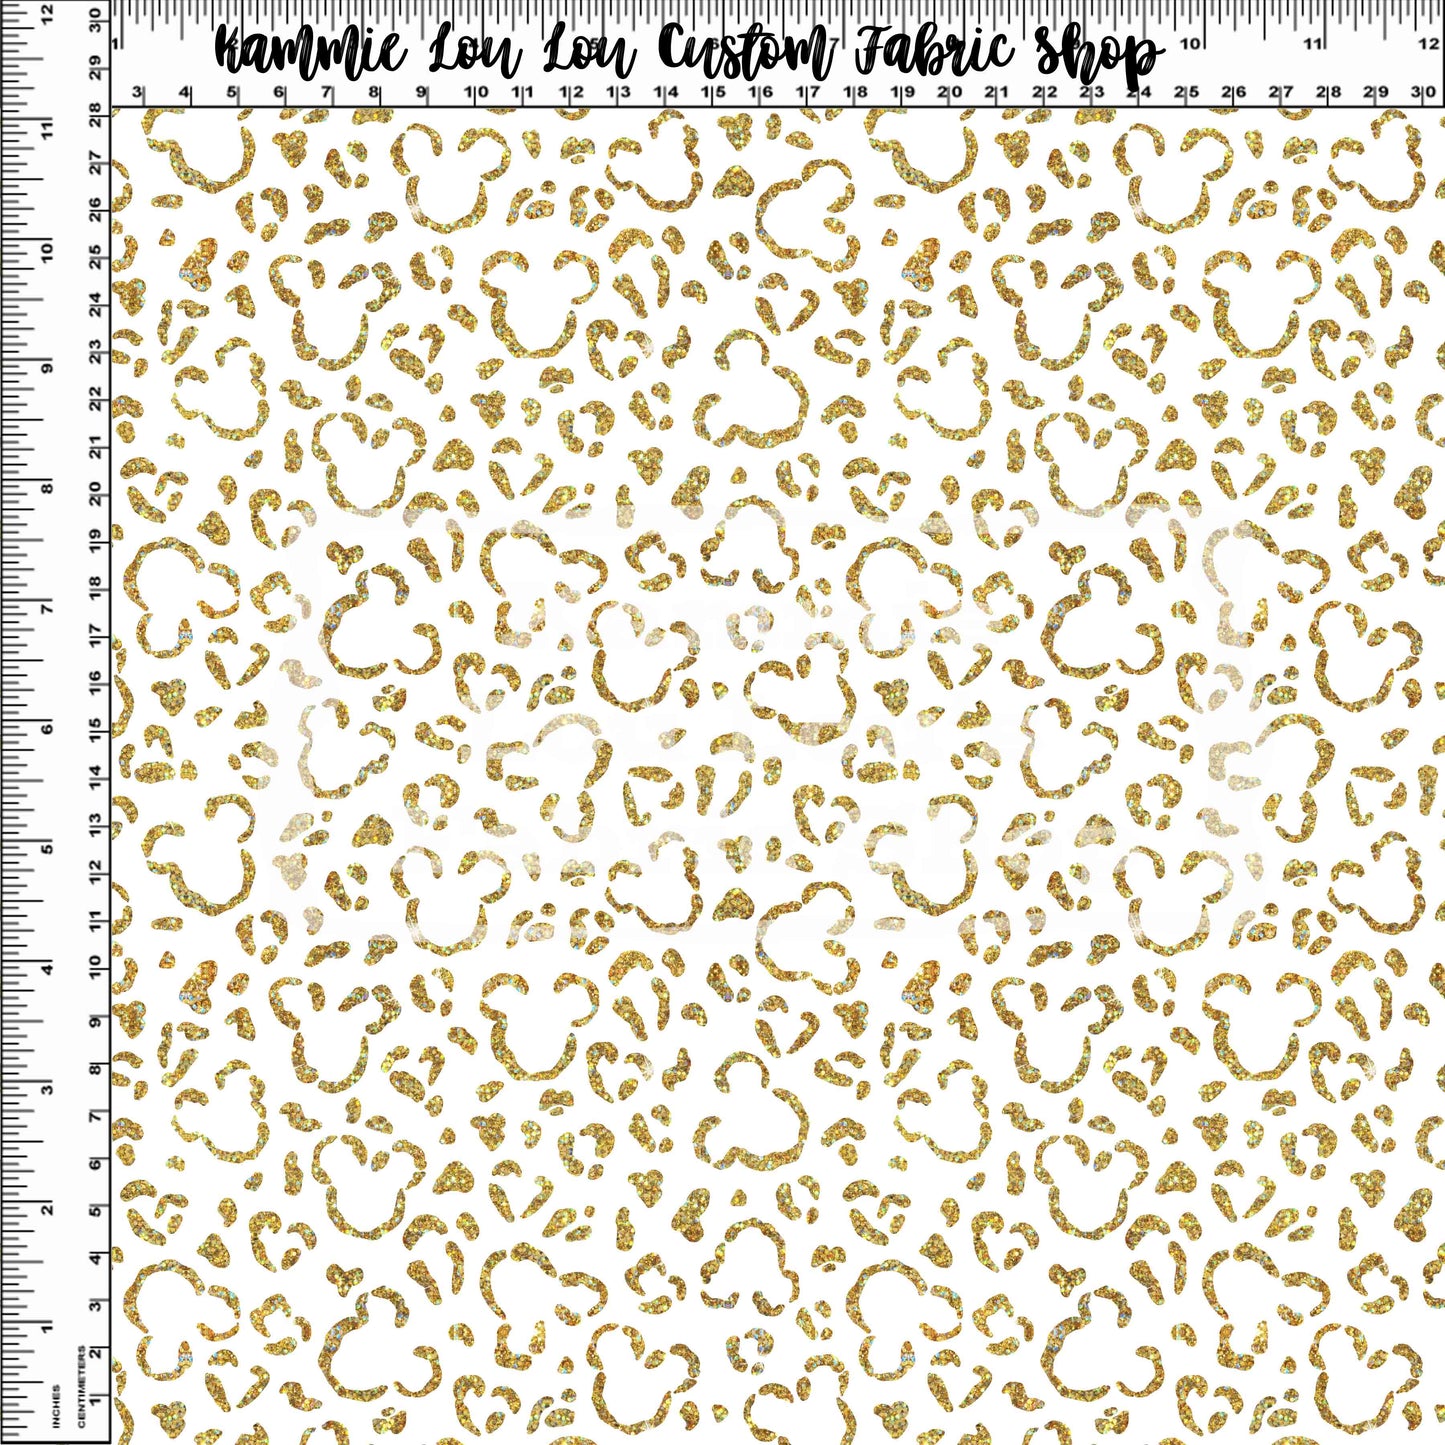 Endless Essentials Pre-Order - Wild Silhouettes - Gold Glitter on White - Small Scale